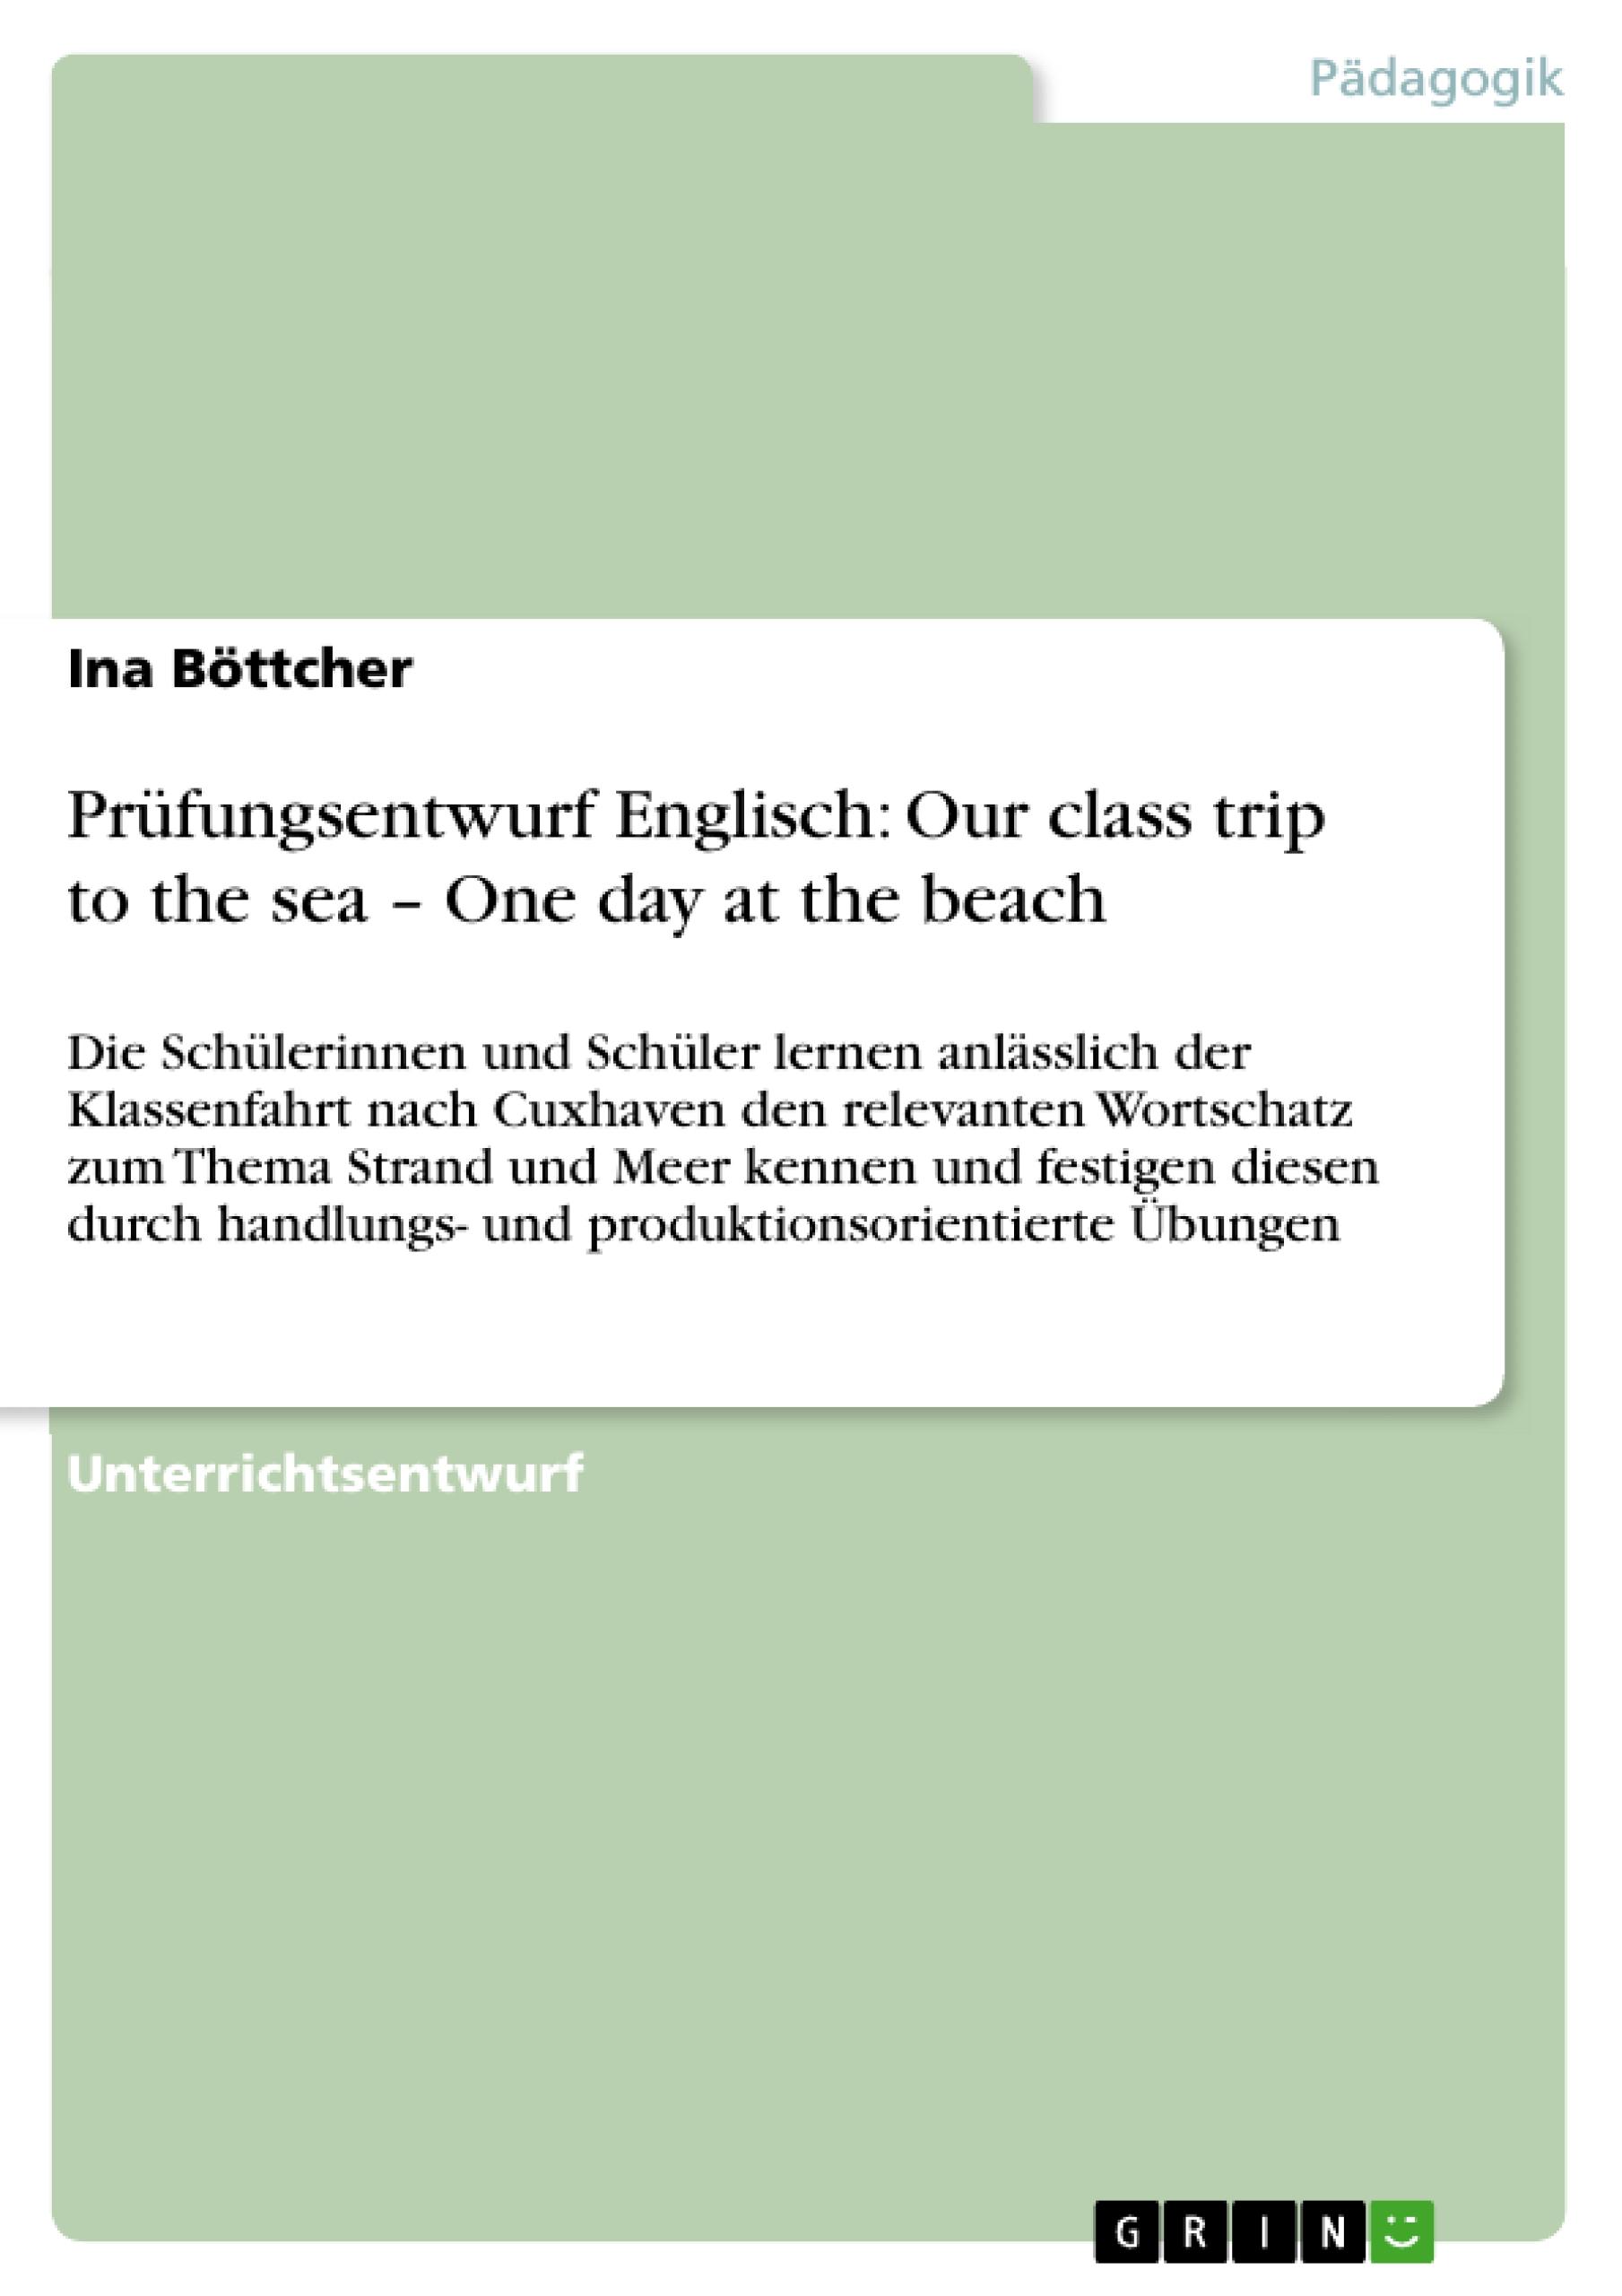 Pruefungsentwurf Englisch: Our class trip to the sea - One day at the beach - Boettcher, Ina